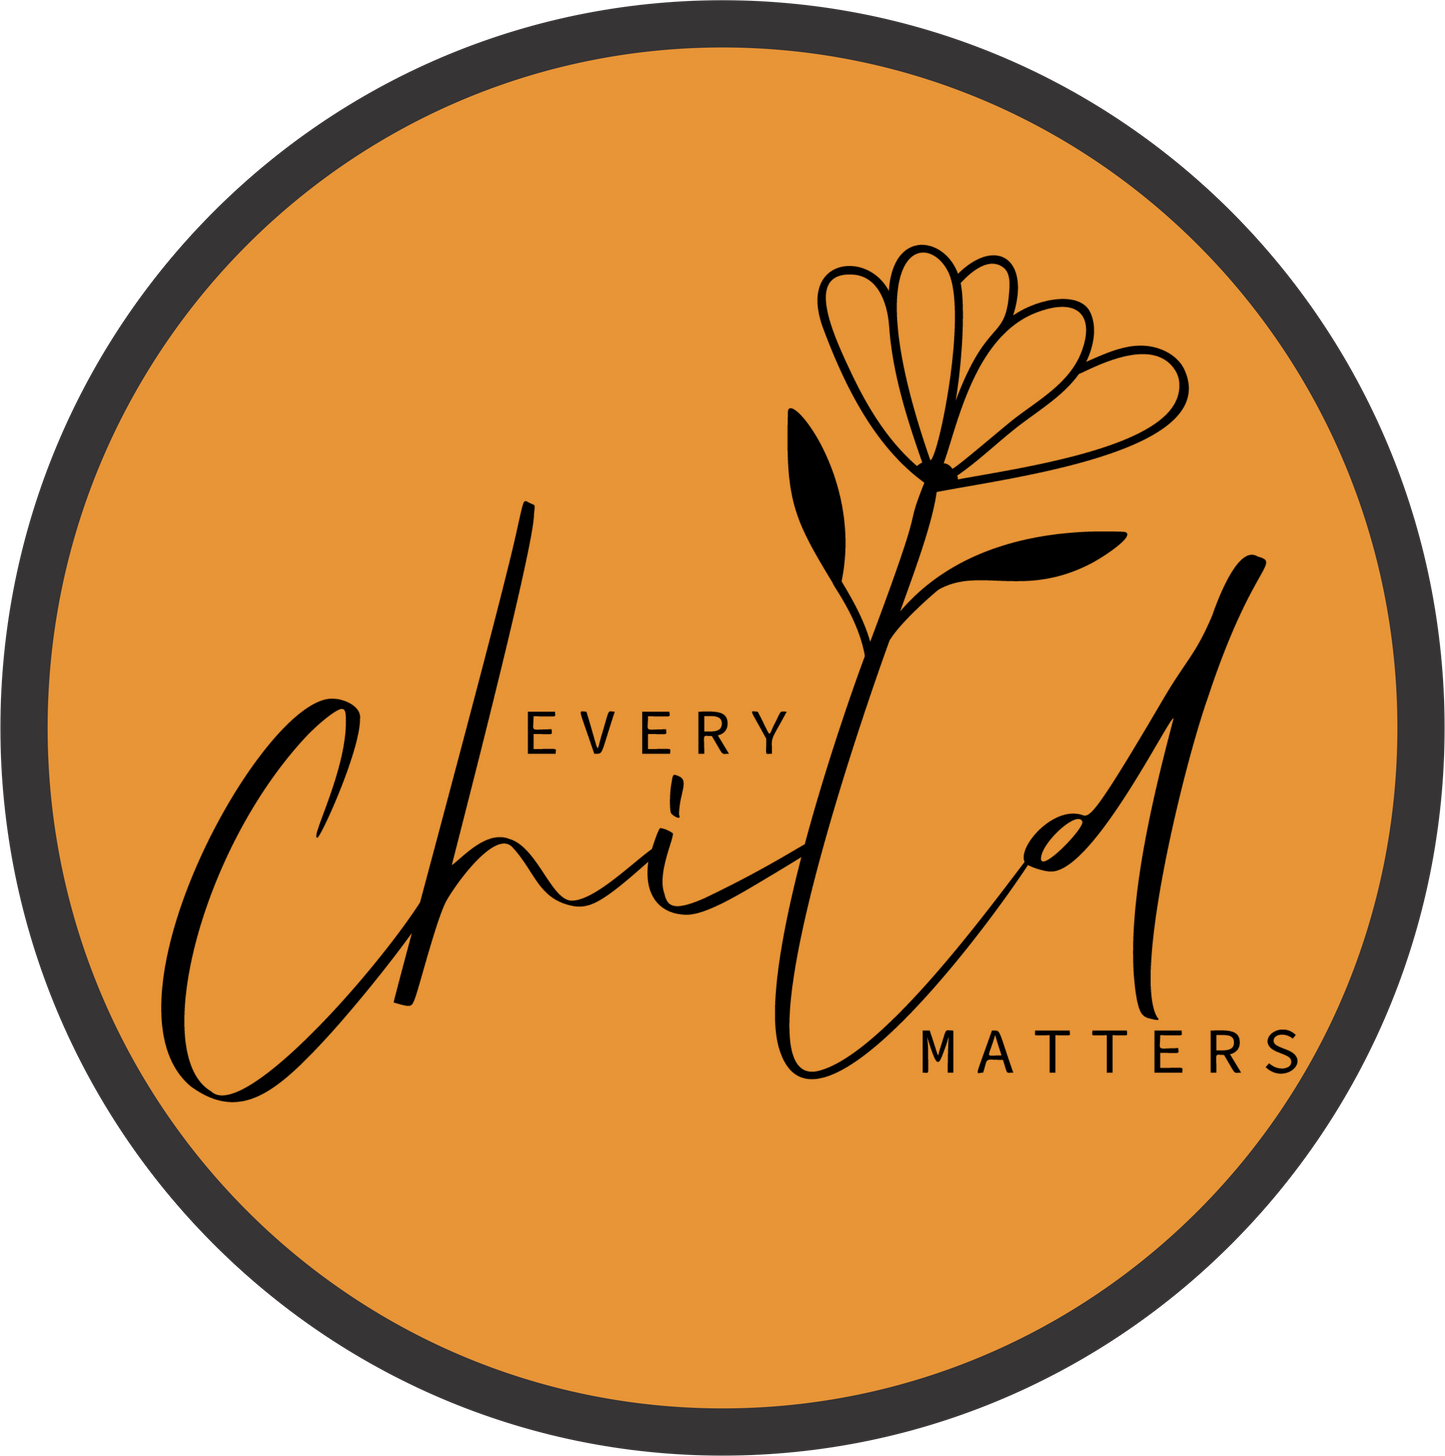 Every child matters with flower round